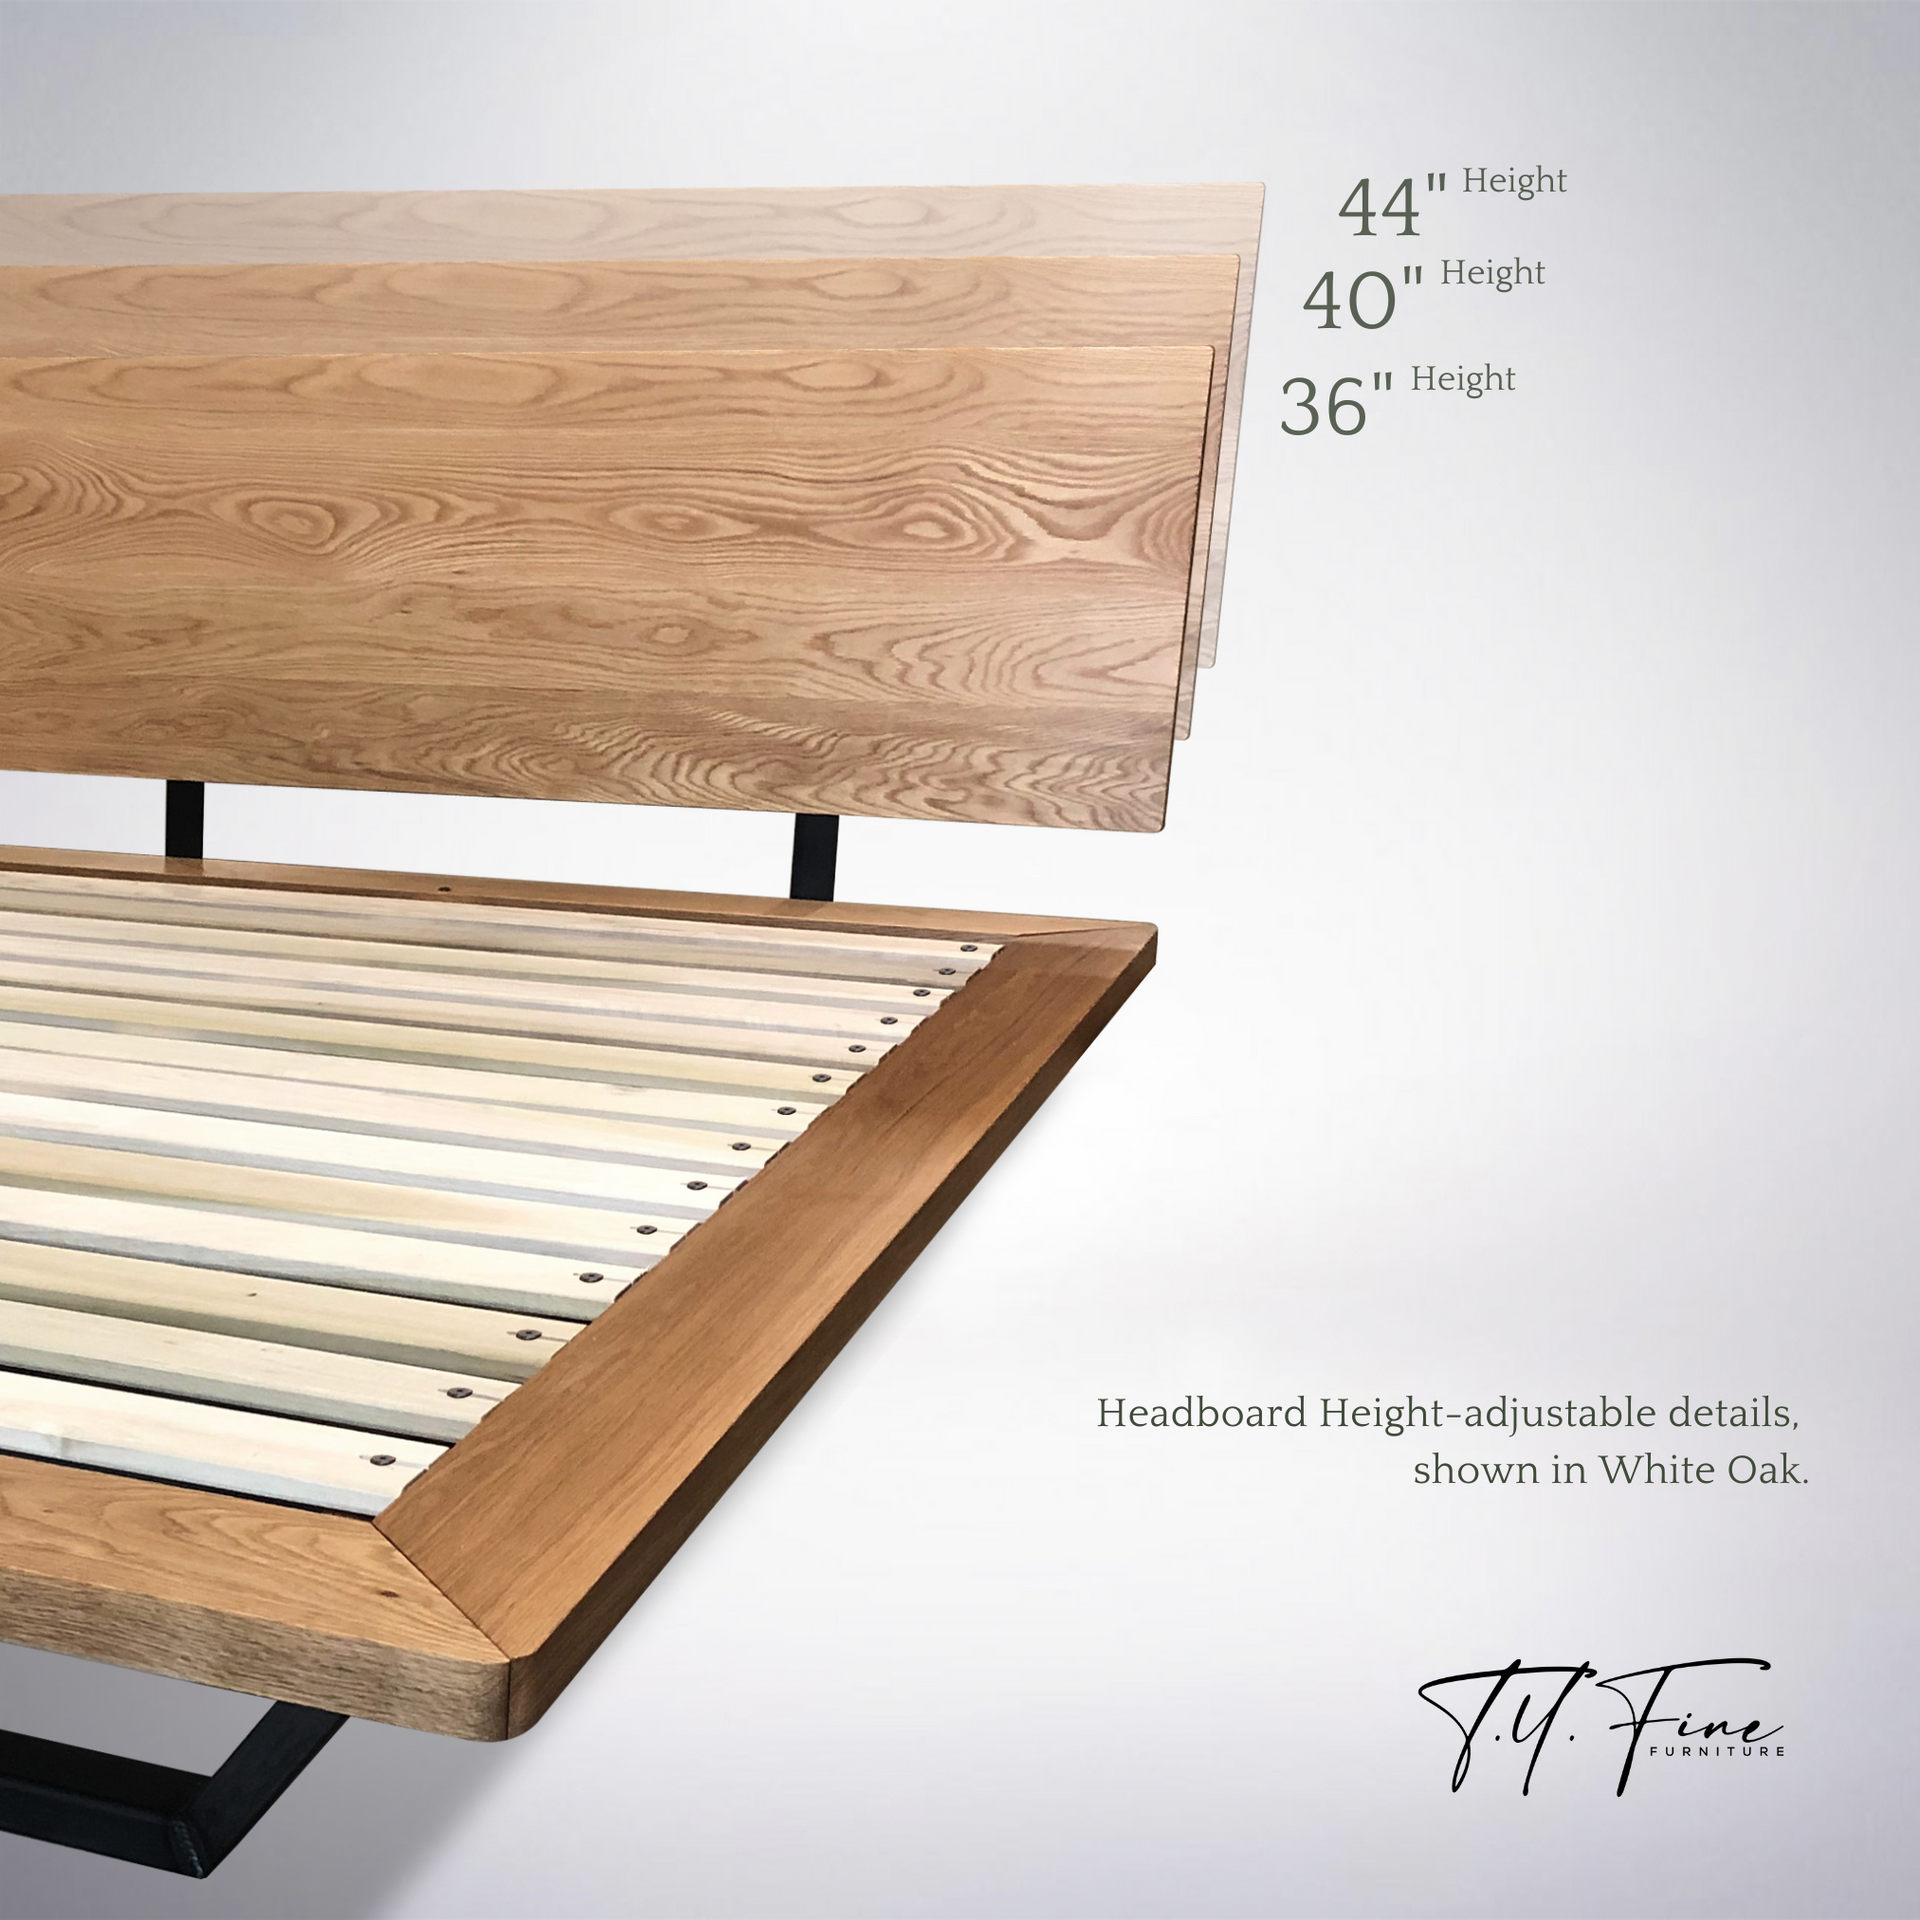 QUICK SHIP - Nelson Platform Bed White Oak Promo - Handcrafted Solid Wood Bed Frame